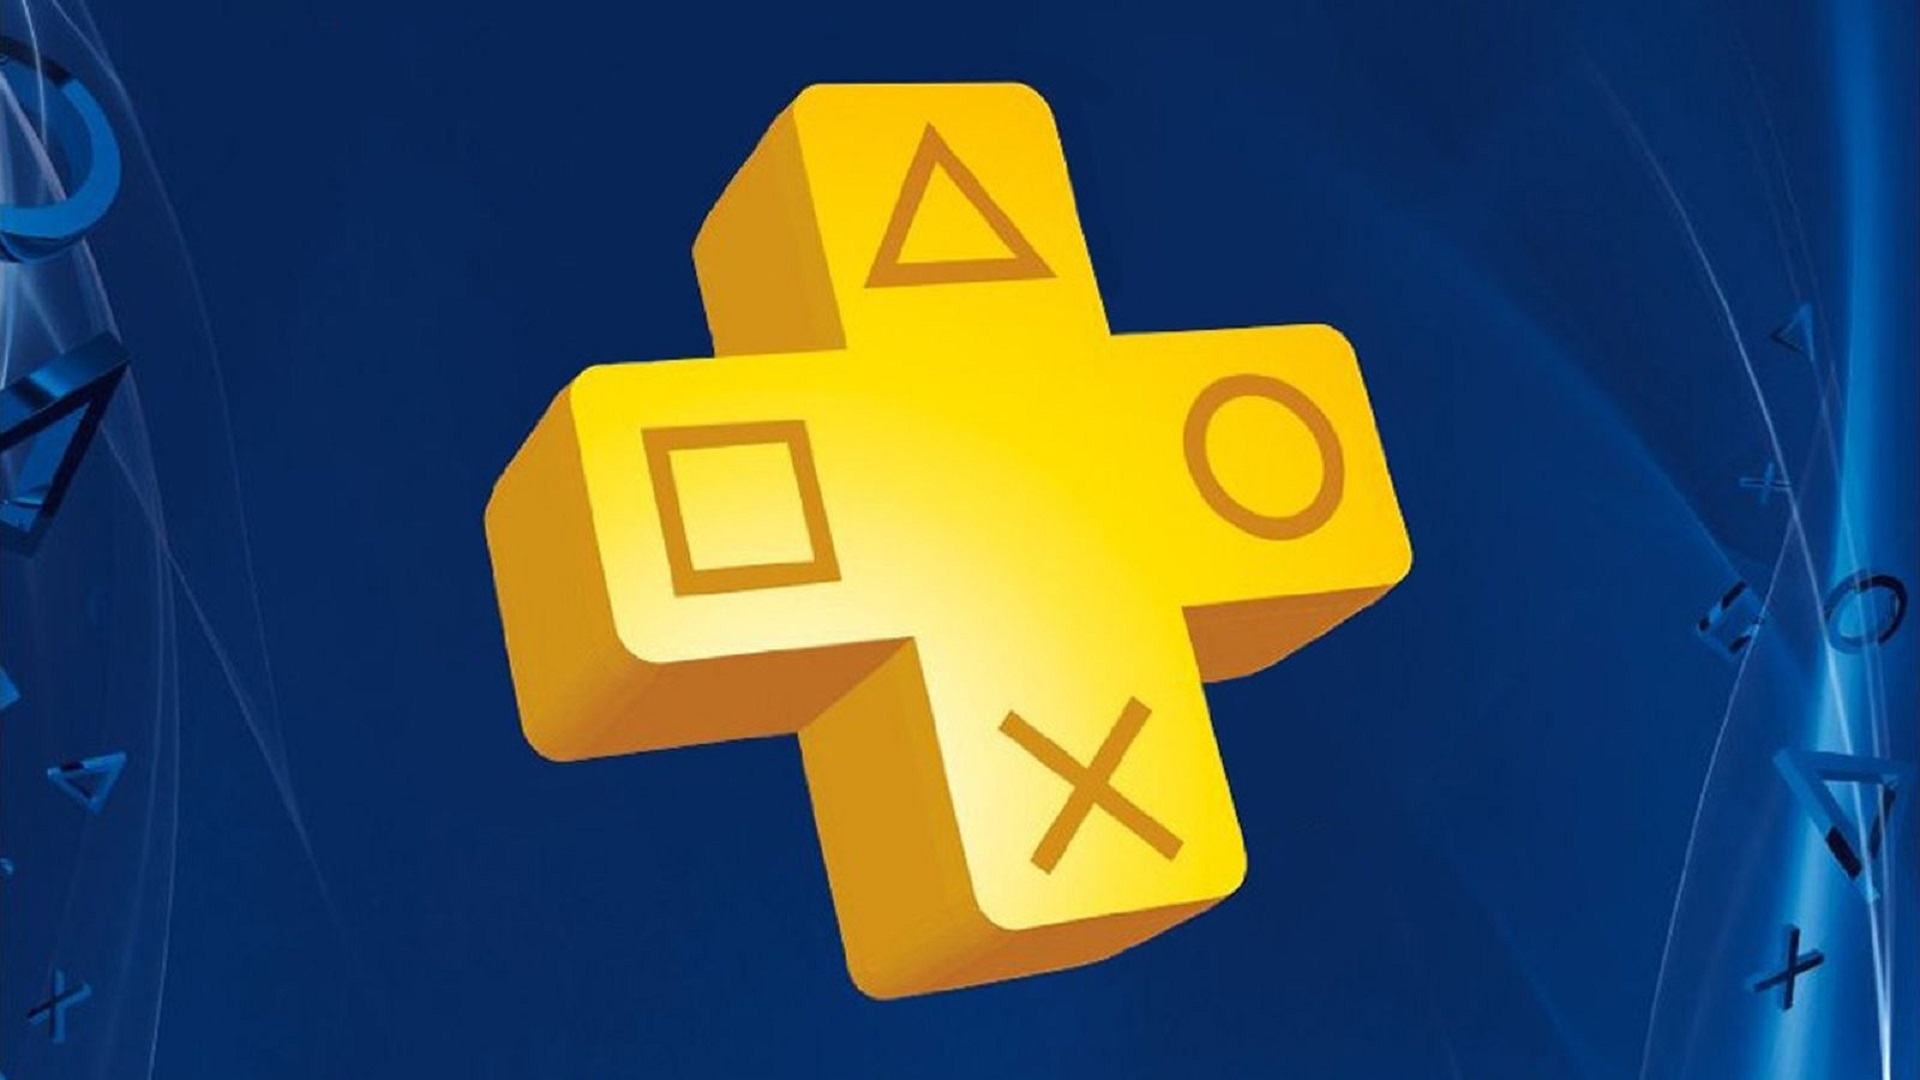 ps4 plus free games february 2020